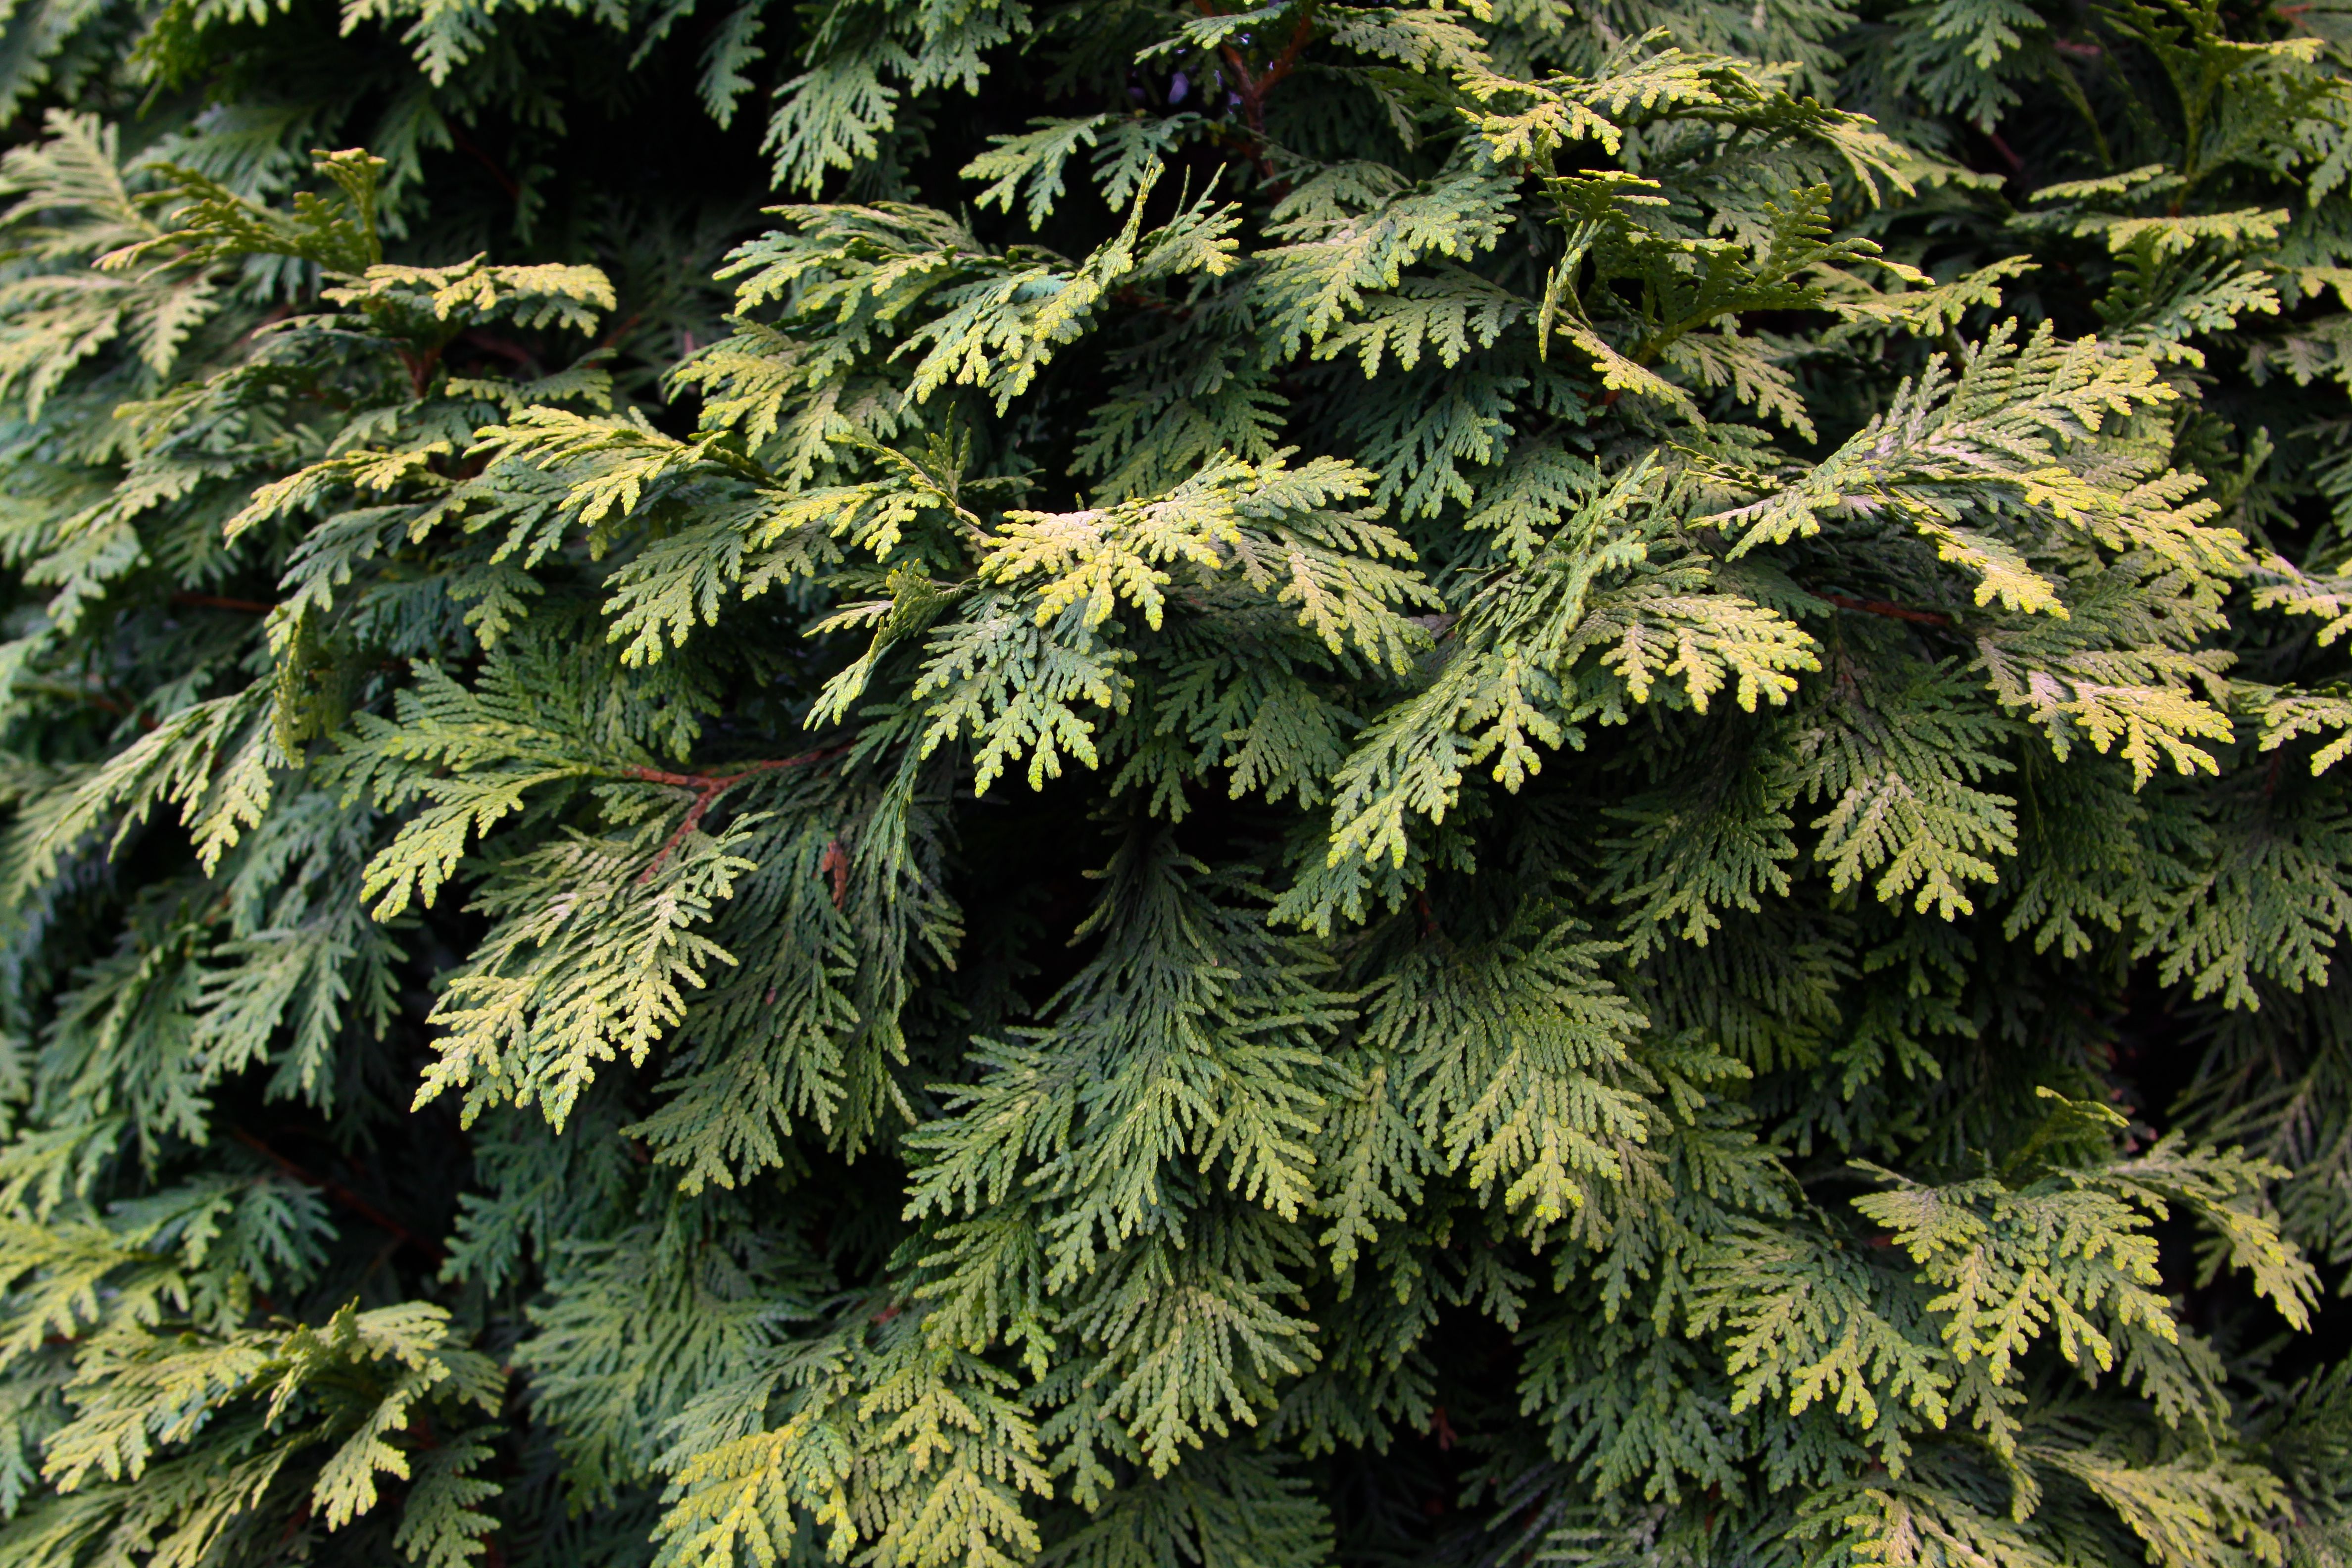 Download wallpaper plant, green, pine, tree, leaves, textures